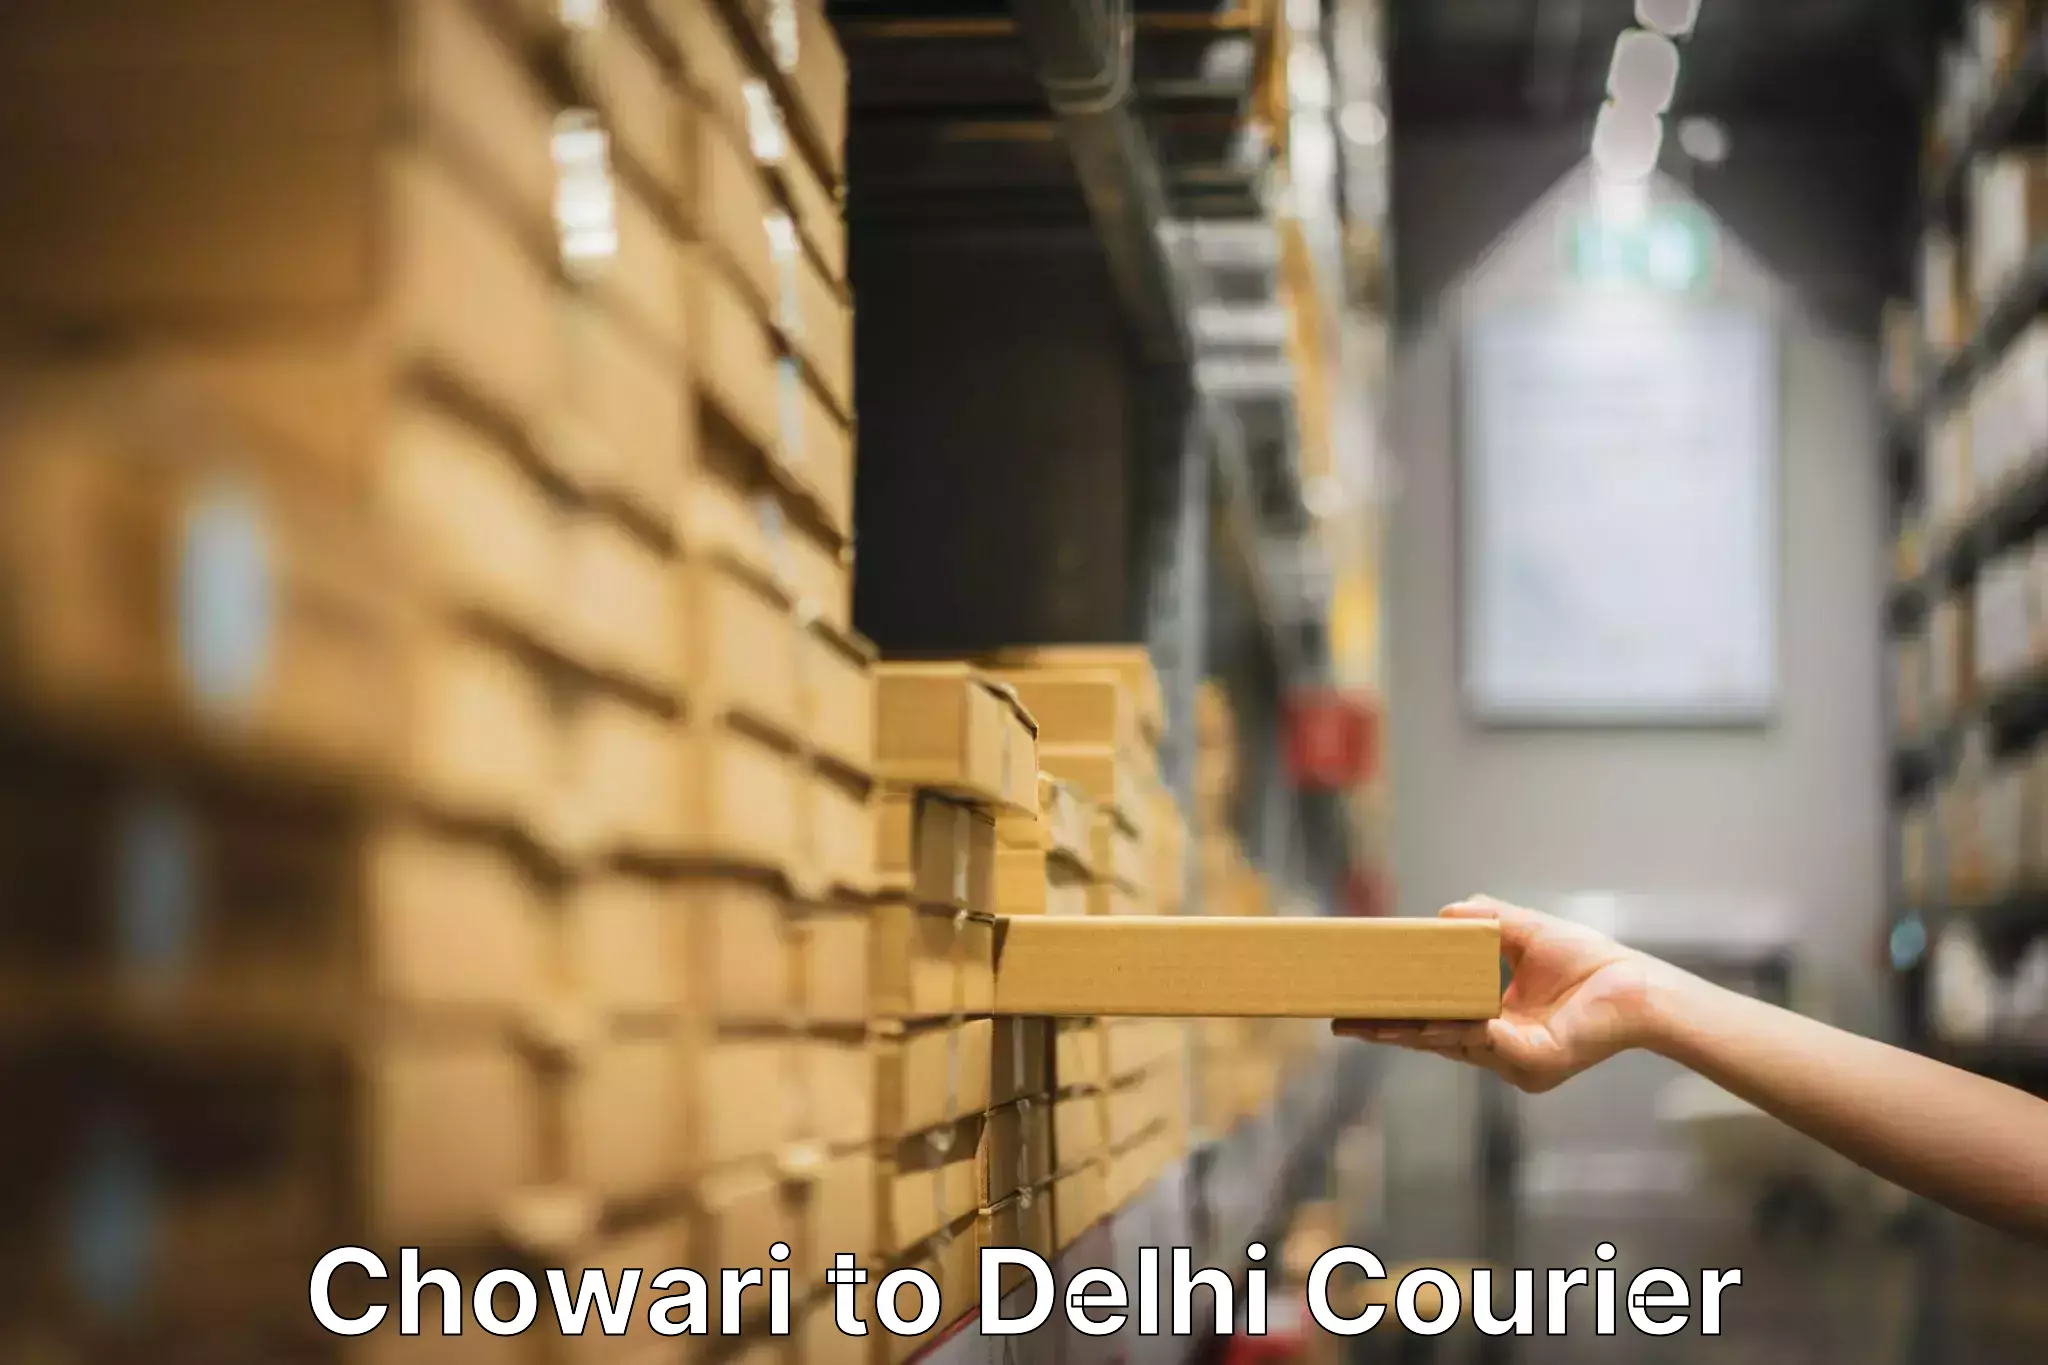 Trusted relocation experts Chowari to Delhi